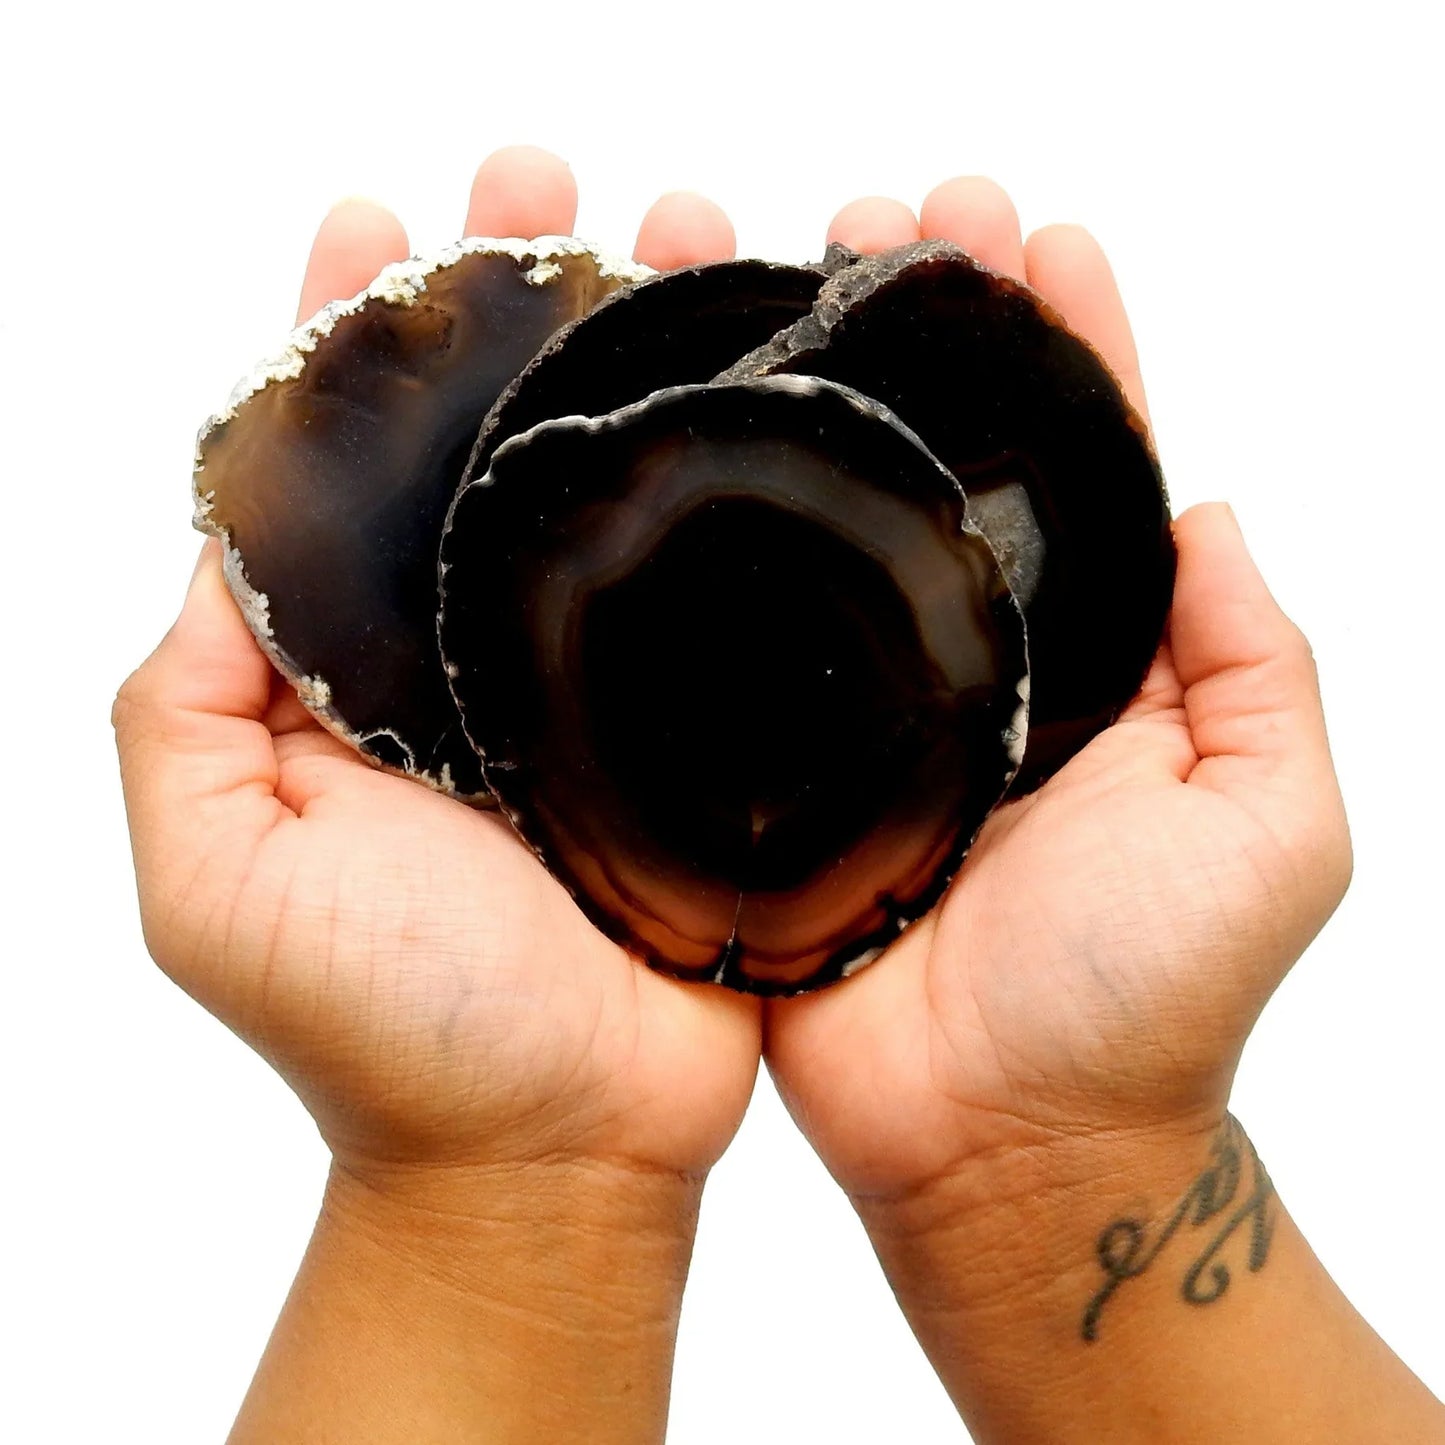 Her Soul belongs to words and books | Natural Black / Brown Agate Slice Shelf Sitter